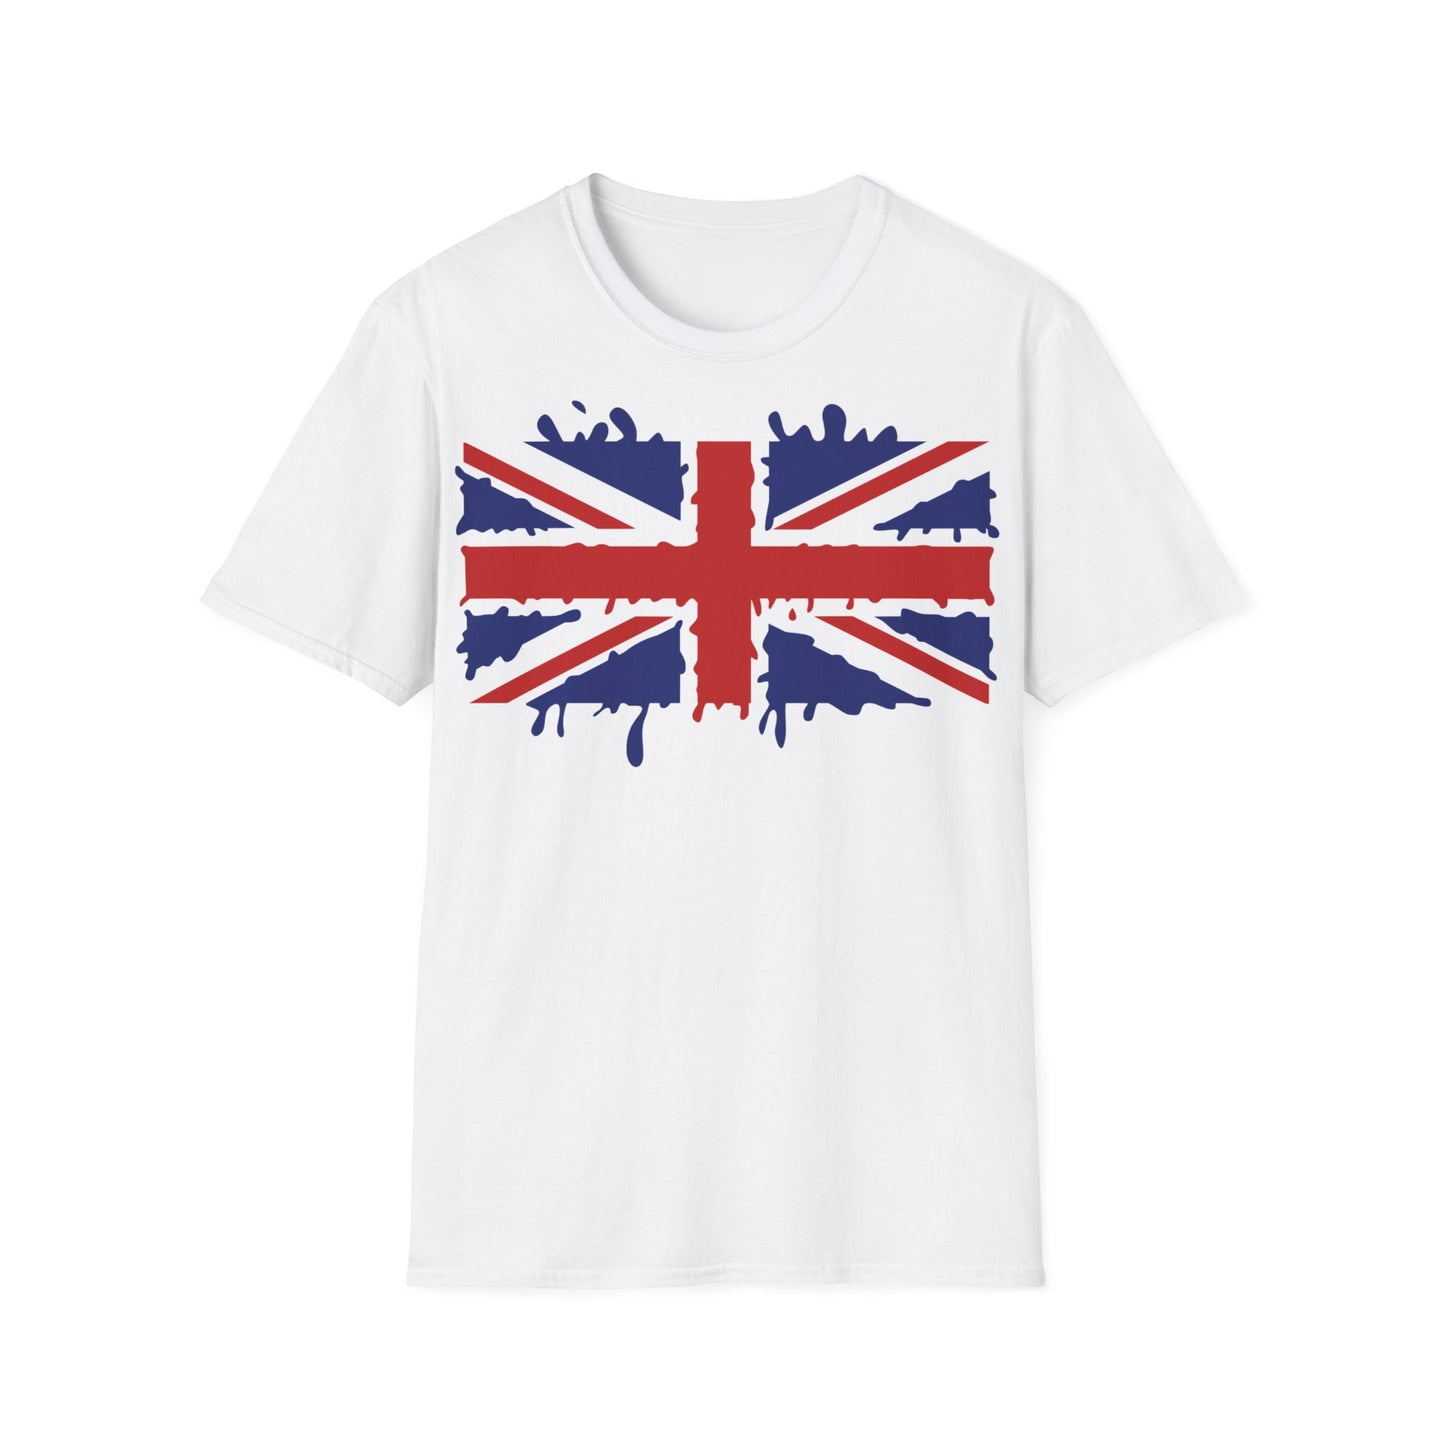 A white t-shirt with a design of the Union Jack flag in a painted splat effect